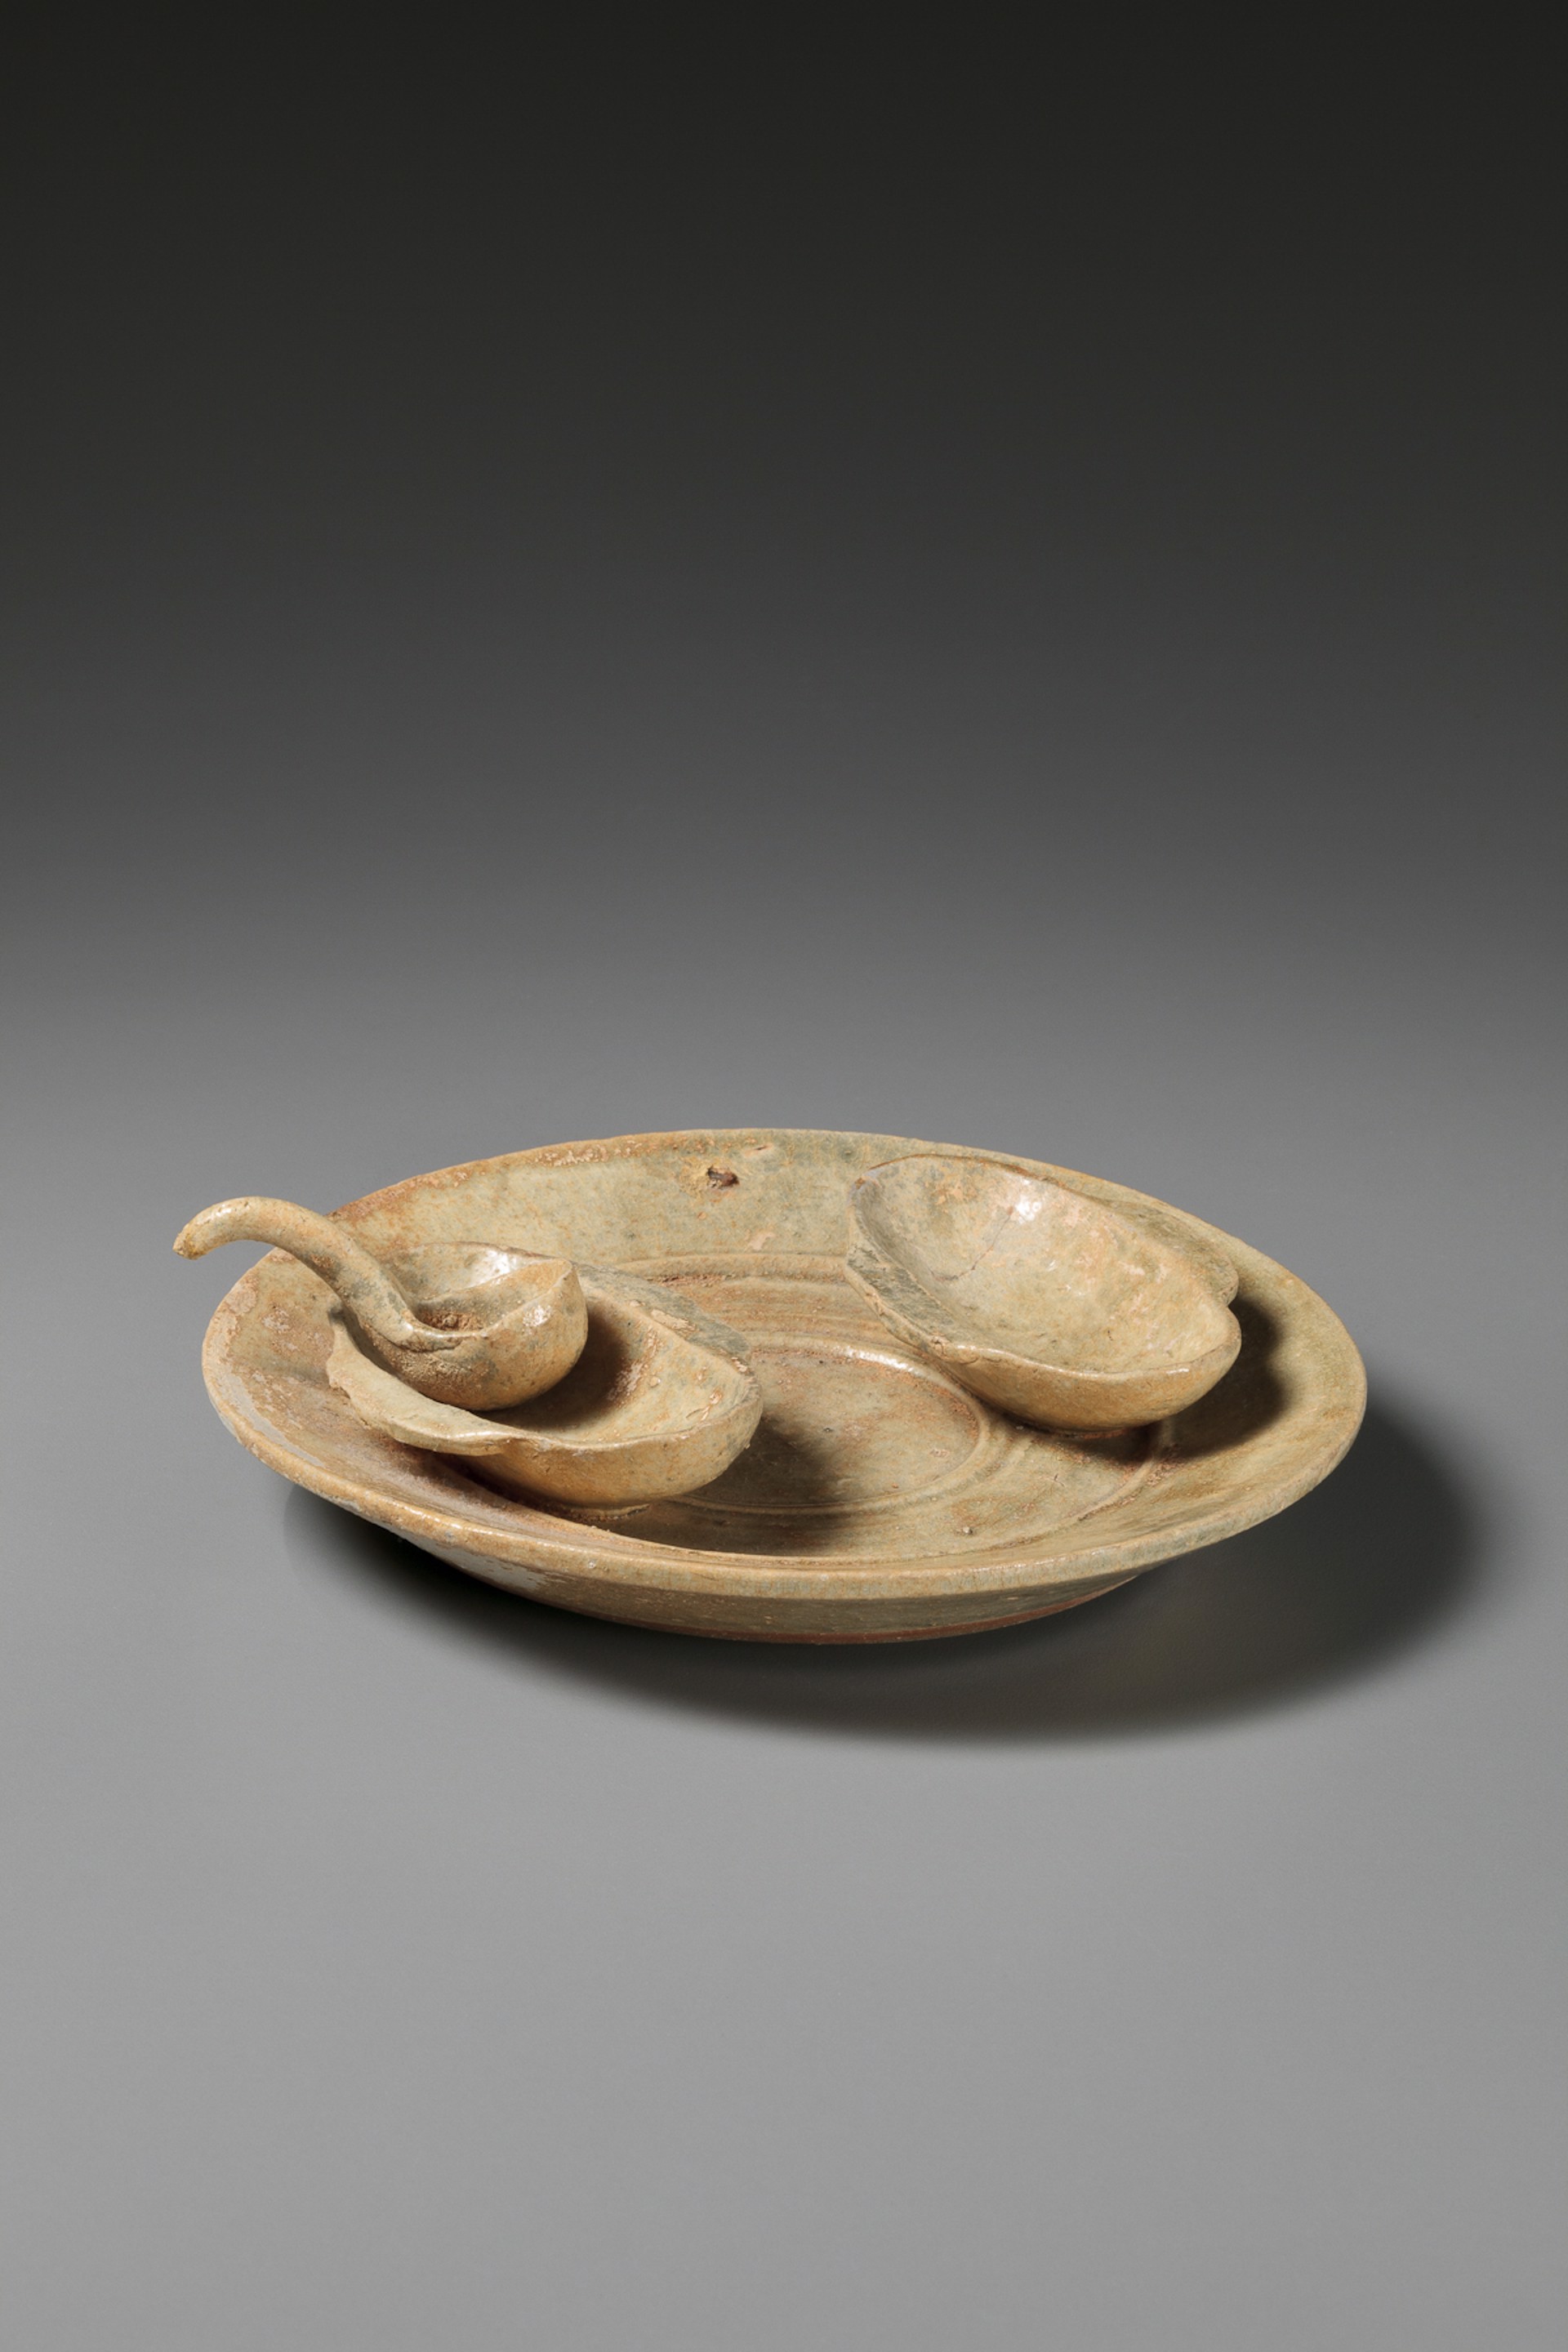 DISH WITH TWO EAR SHAPED CUPS AND A SMALL LADLE